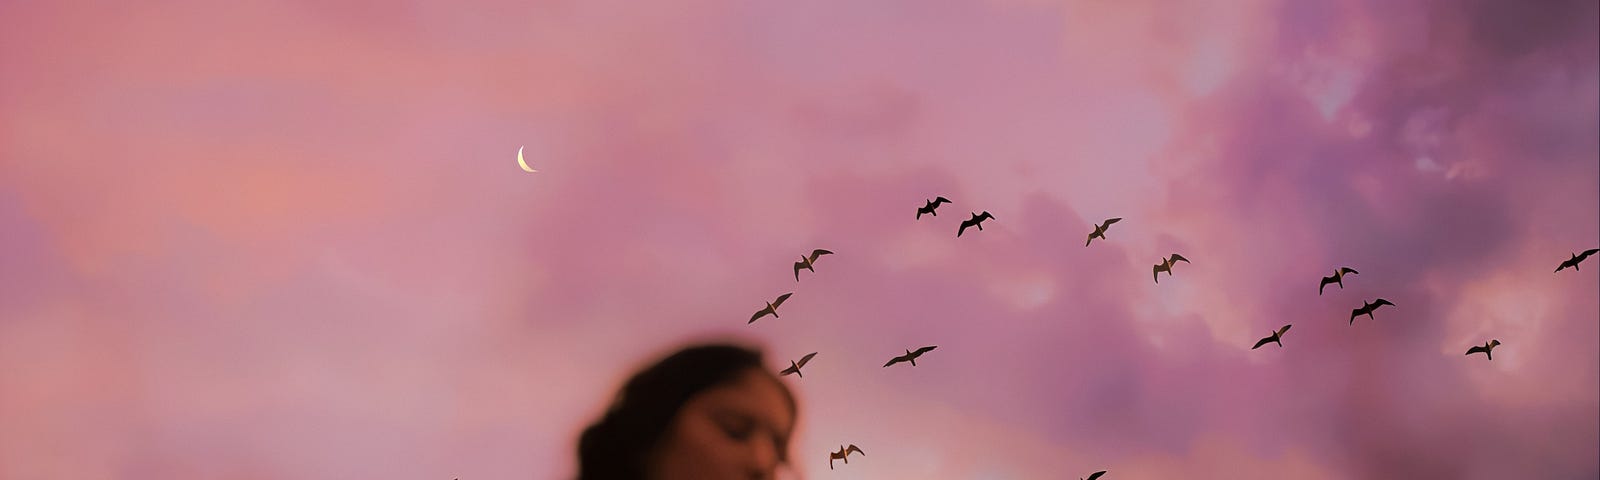 an out of focus woman in black standing beneath a moody pink sky with a crescent moon and dozens of black birds flying above.